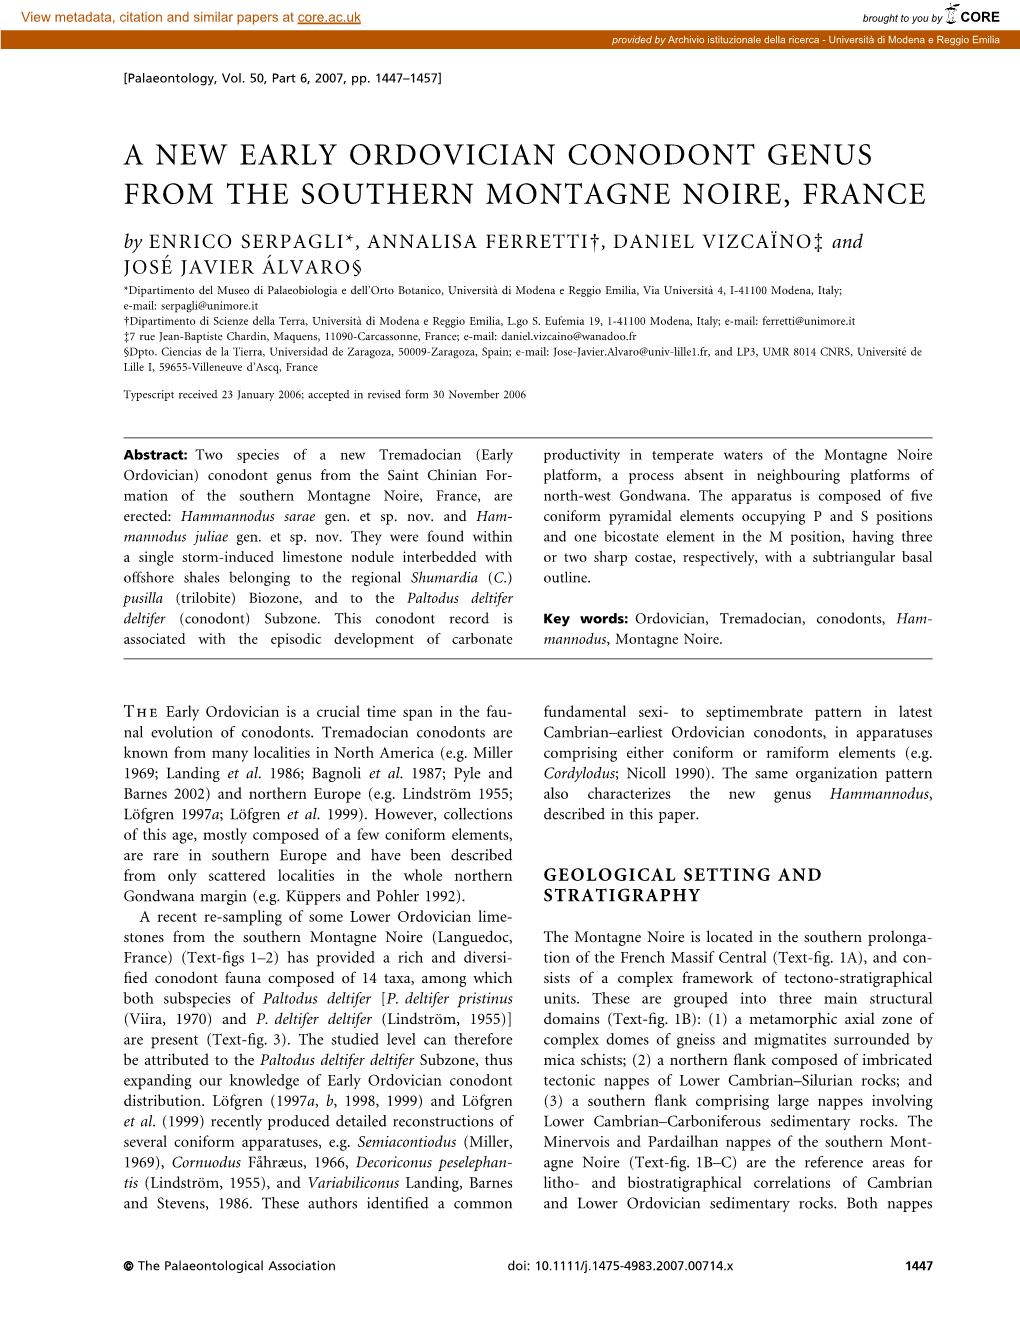 A New Early Ordovician Conodont Genus from the Southern Montagne Noire, France